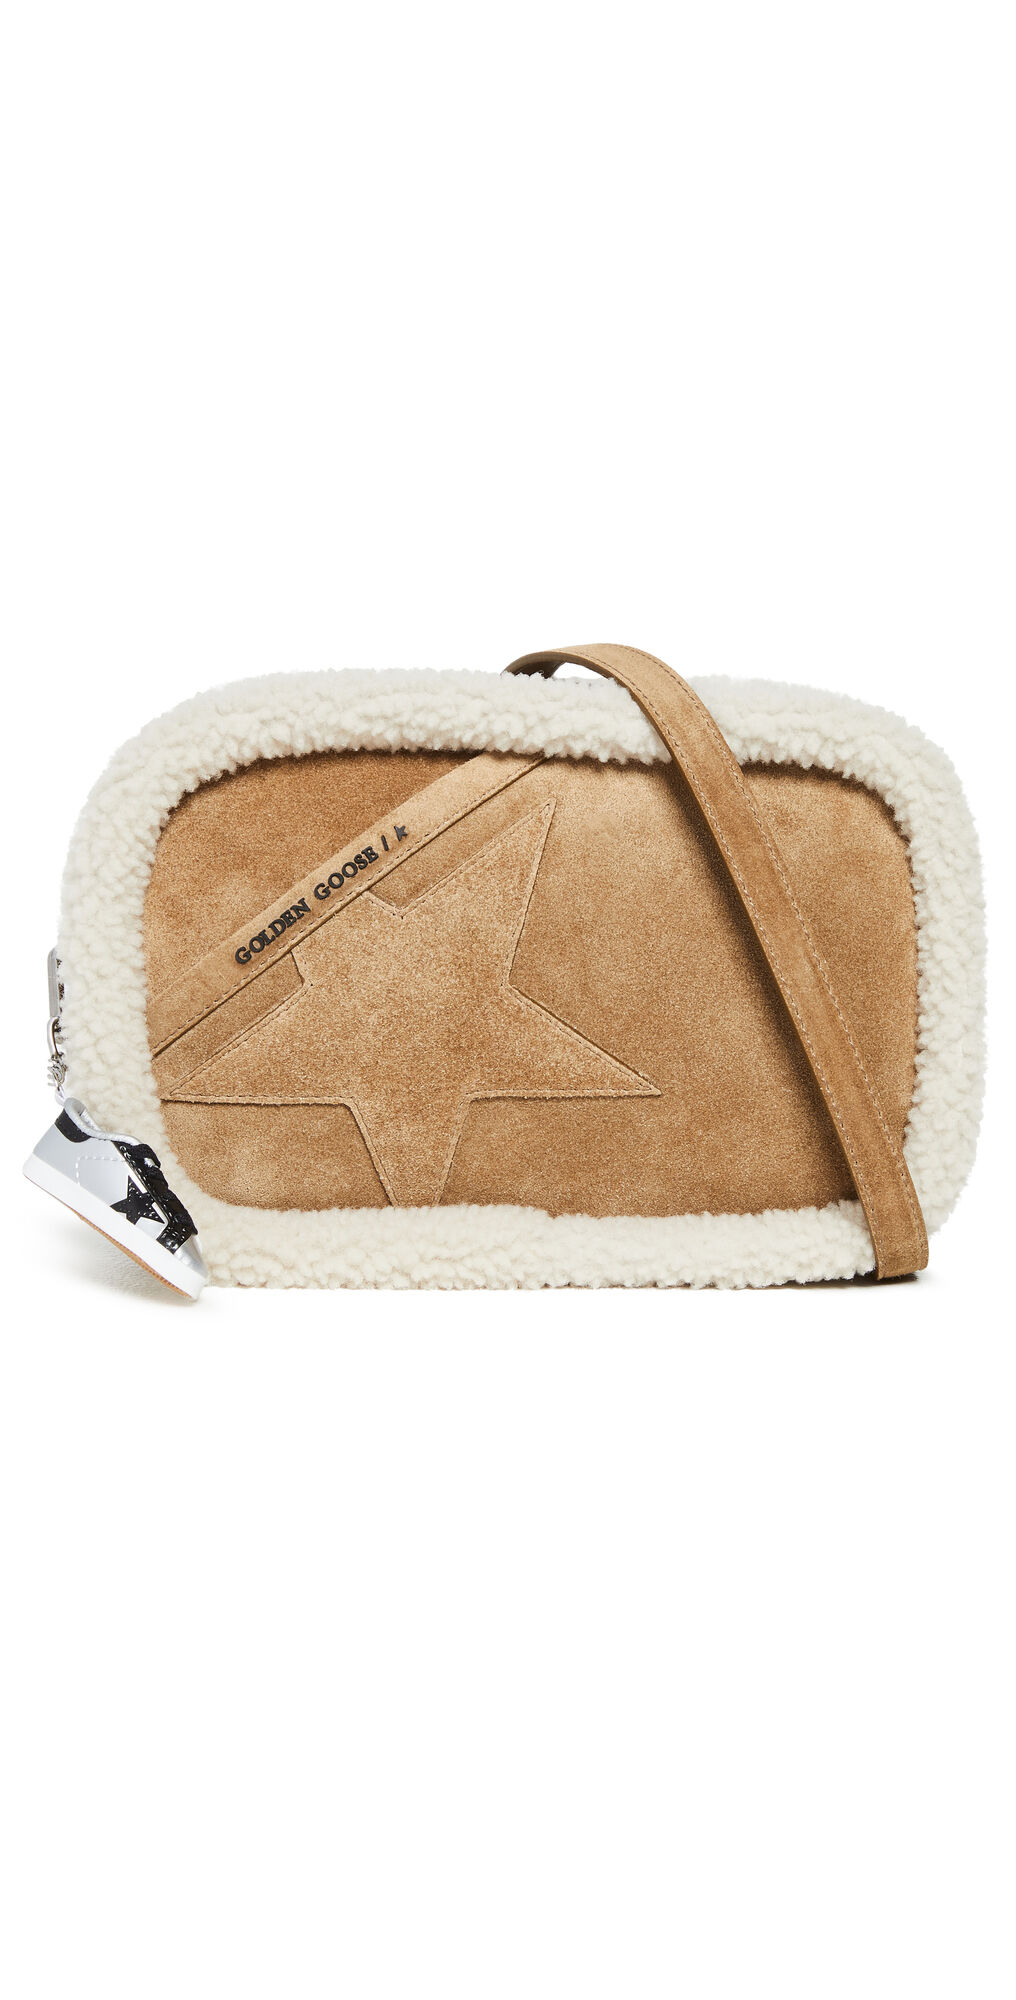 Golden Goose Star Bag Brown/White One Size  Brown/White  size:One Size